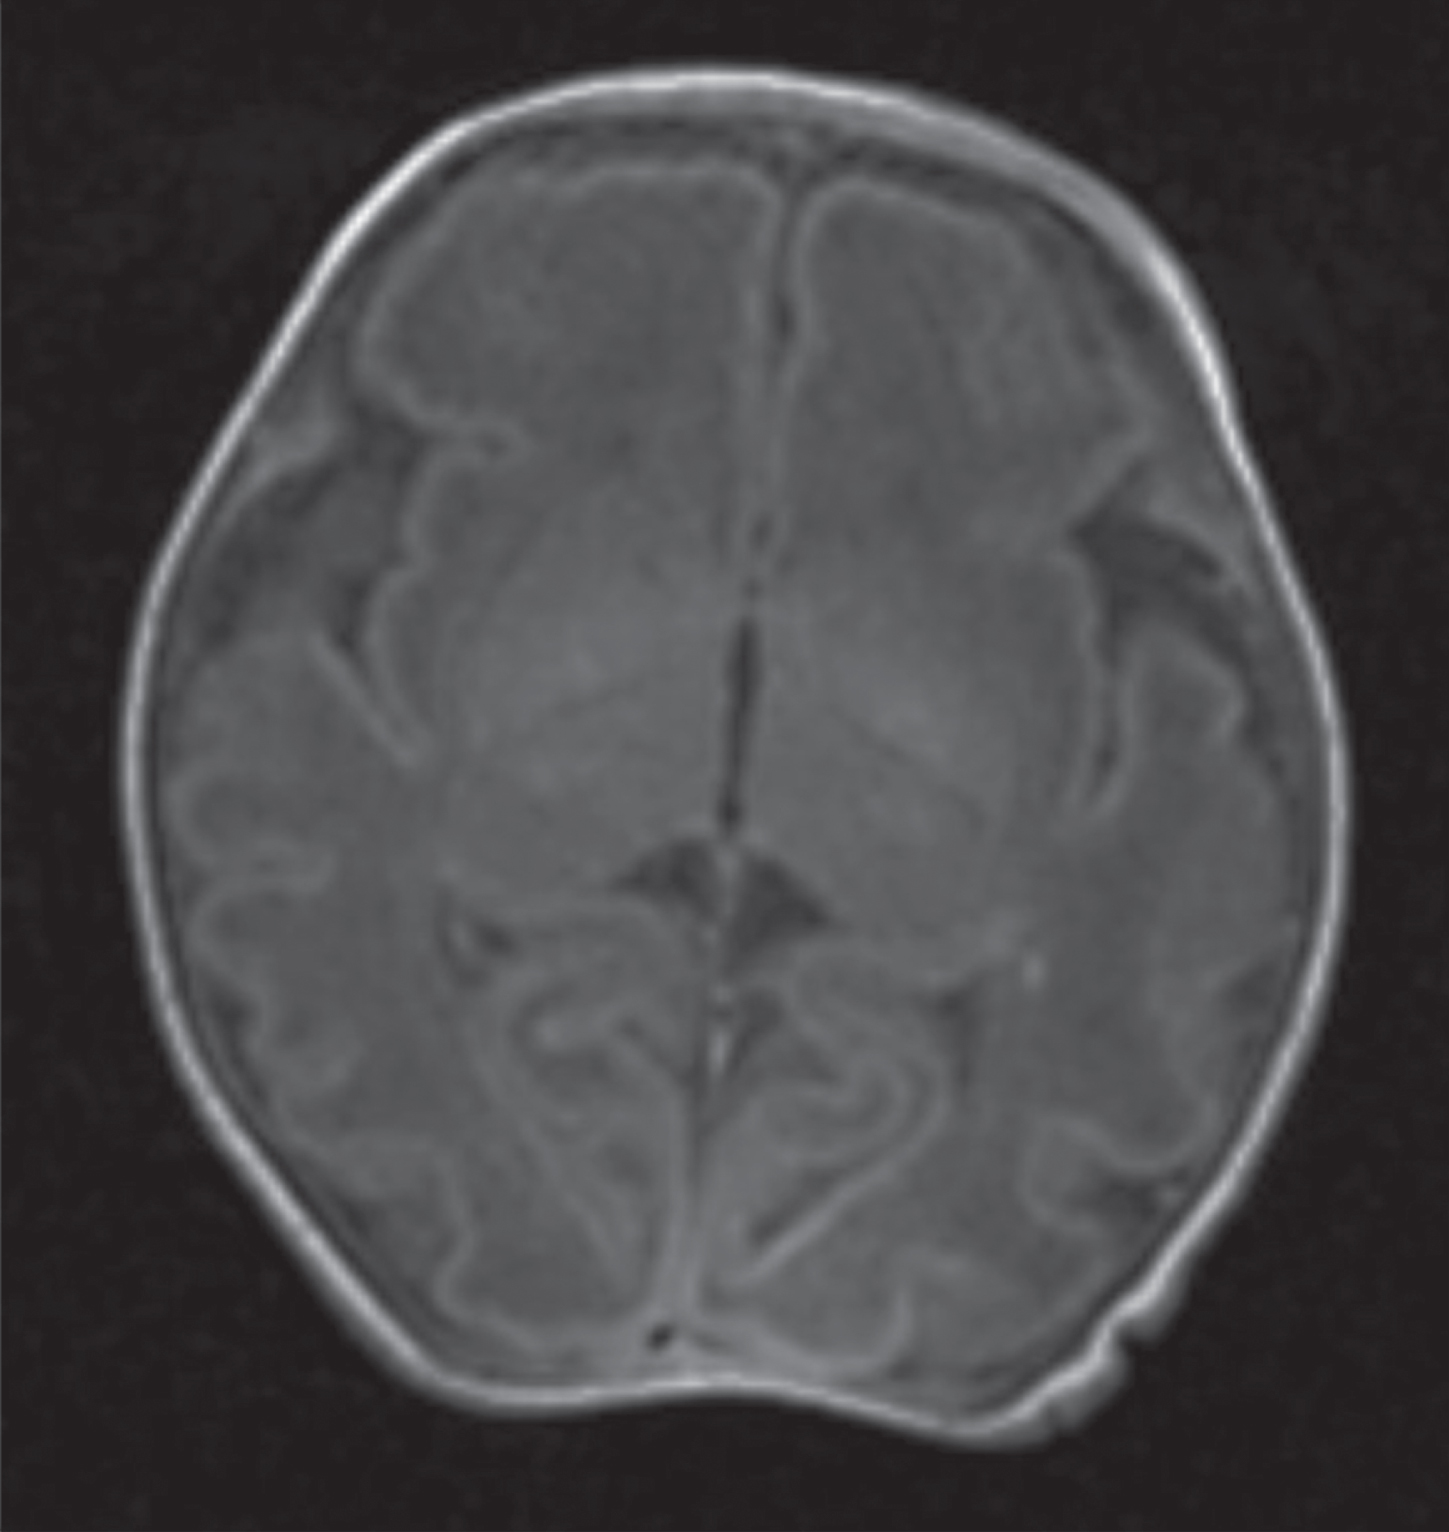 Axial T1 image of same baby at day 5 showing area of gliosis in left parietal lobe